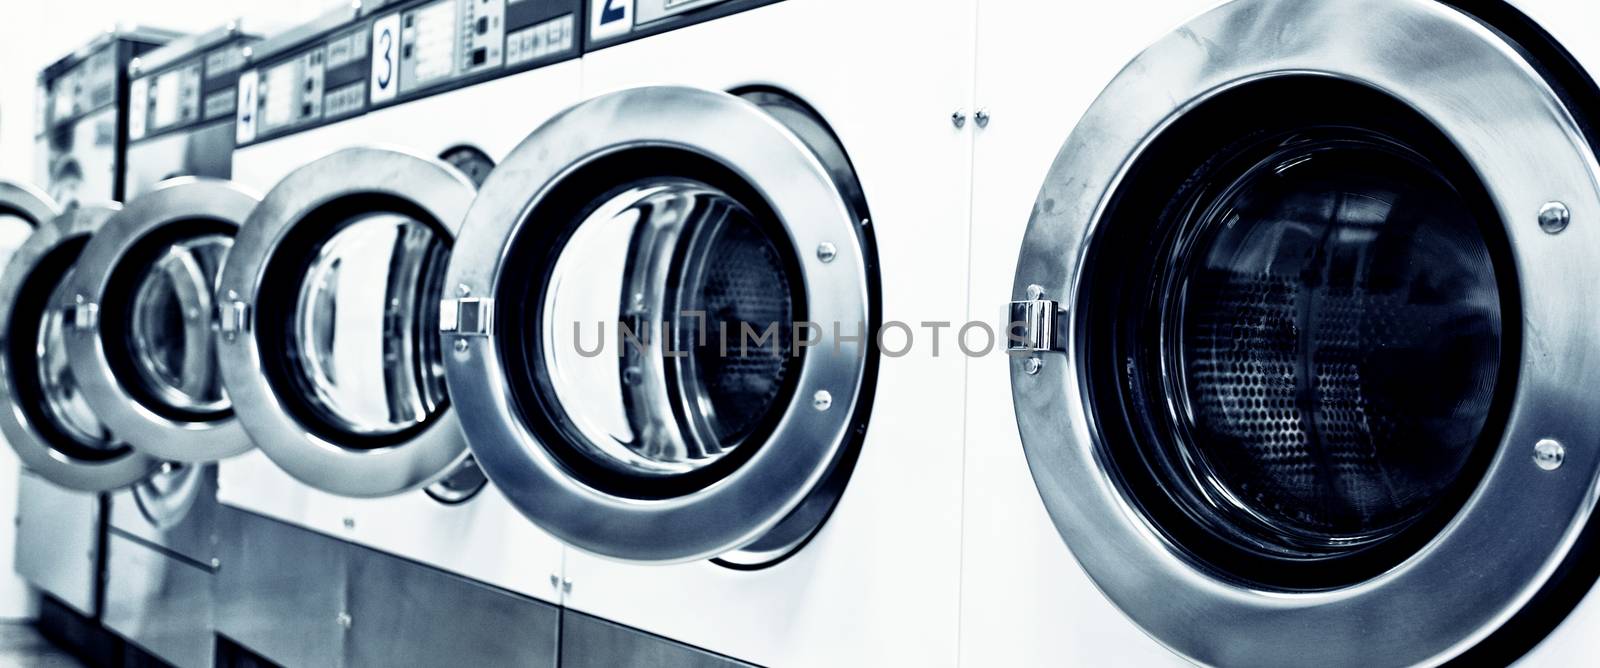 industrial washing machines in a public laundromat 